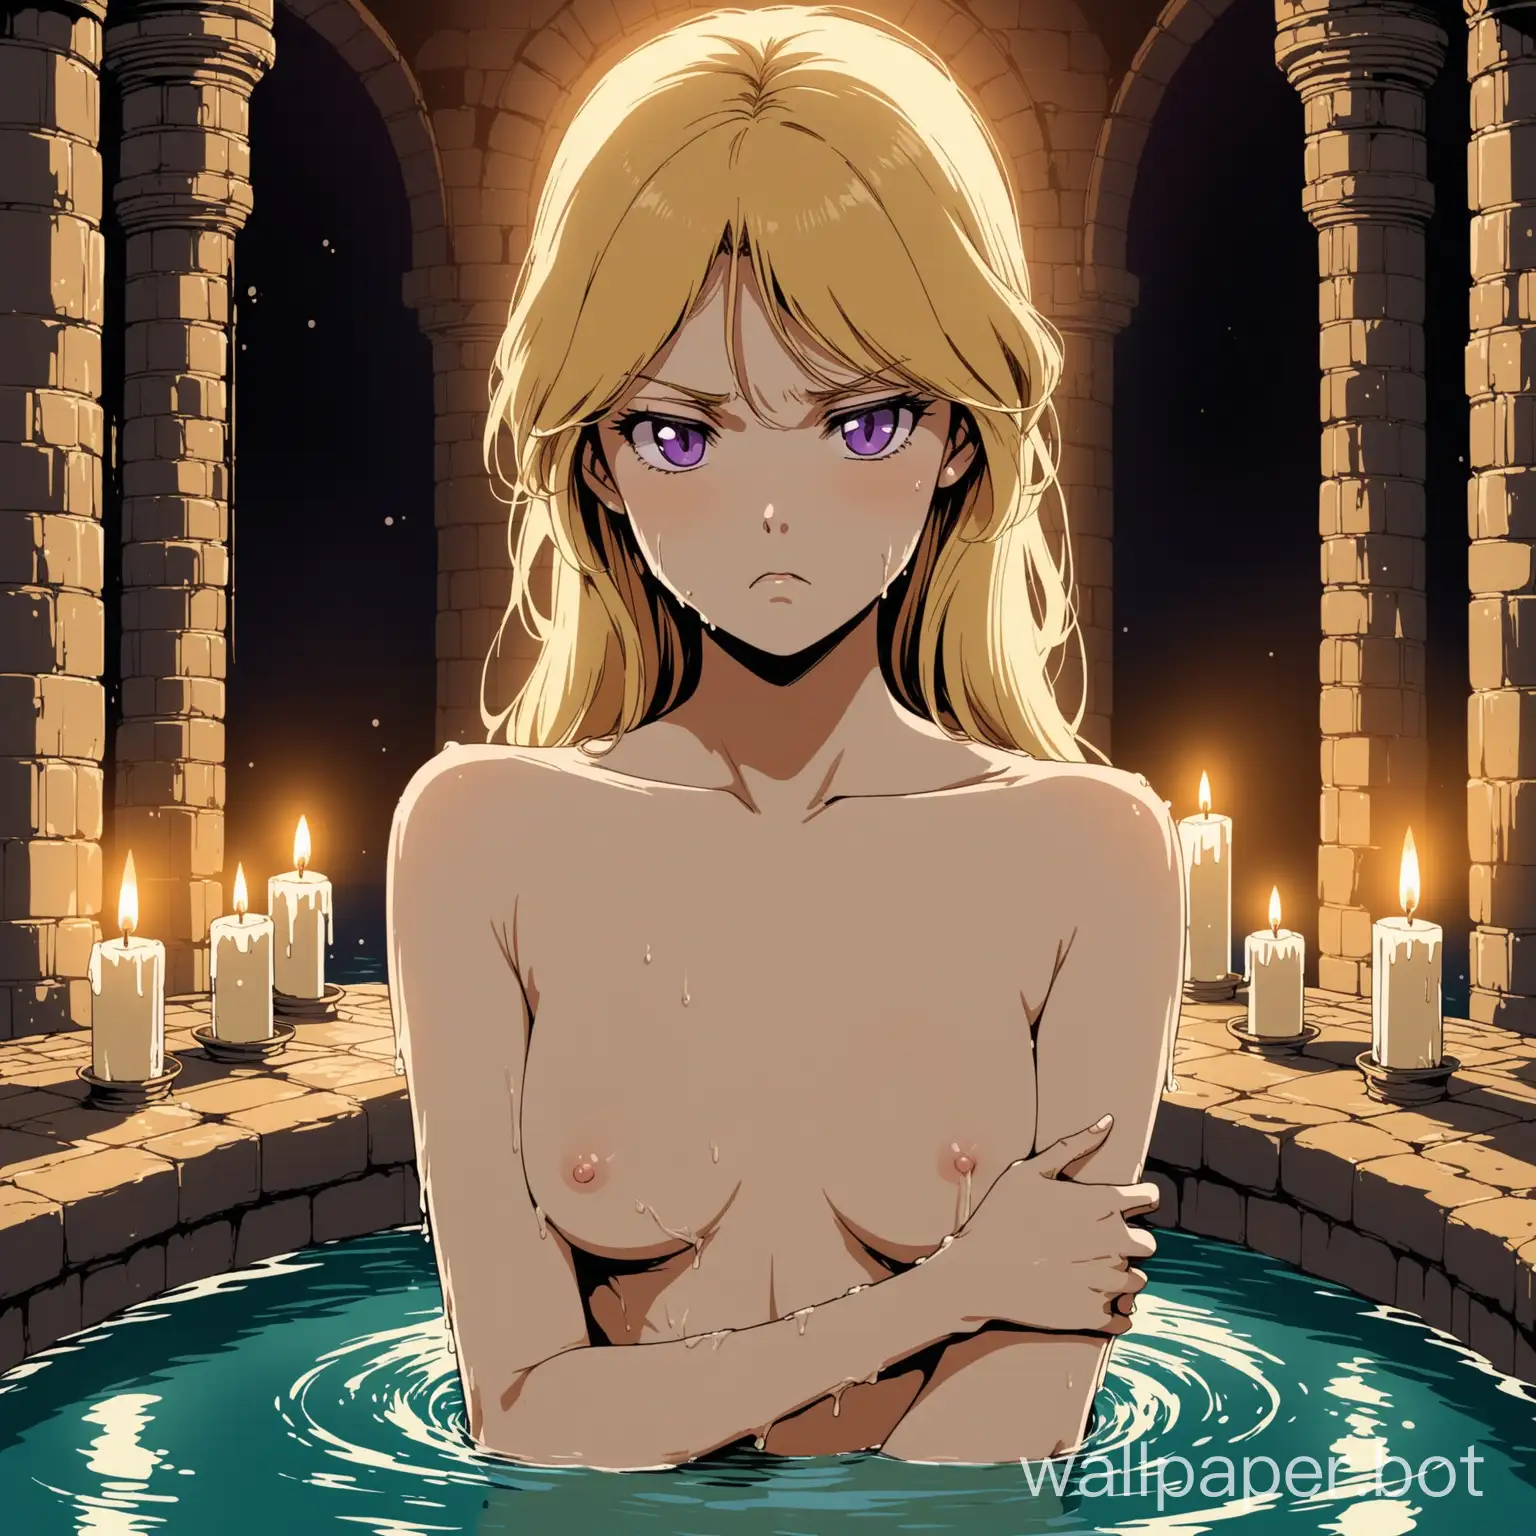 scene of a beautiful naked young blonde woman bathing in a roman bathhouse, underwater up to her chest, water up to her navel, she is grimy and gross, dirty and unhygienic, she is thin and elegant, youthful face, thin and elegant face, pouting, she is angry and embarrassed, arms crossed, slender elegance, long messy disheveled golden-blonde hair that is parted in the middle,  violet eyes, she is slender and sexy, 1980s retro anime, medieval elegance, castle interior, dimly lit, flat colors, candlelight, pale skin